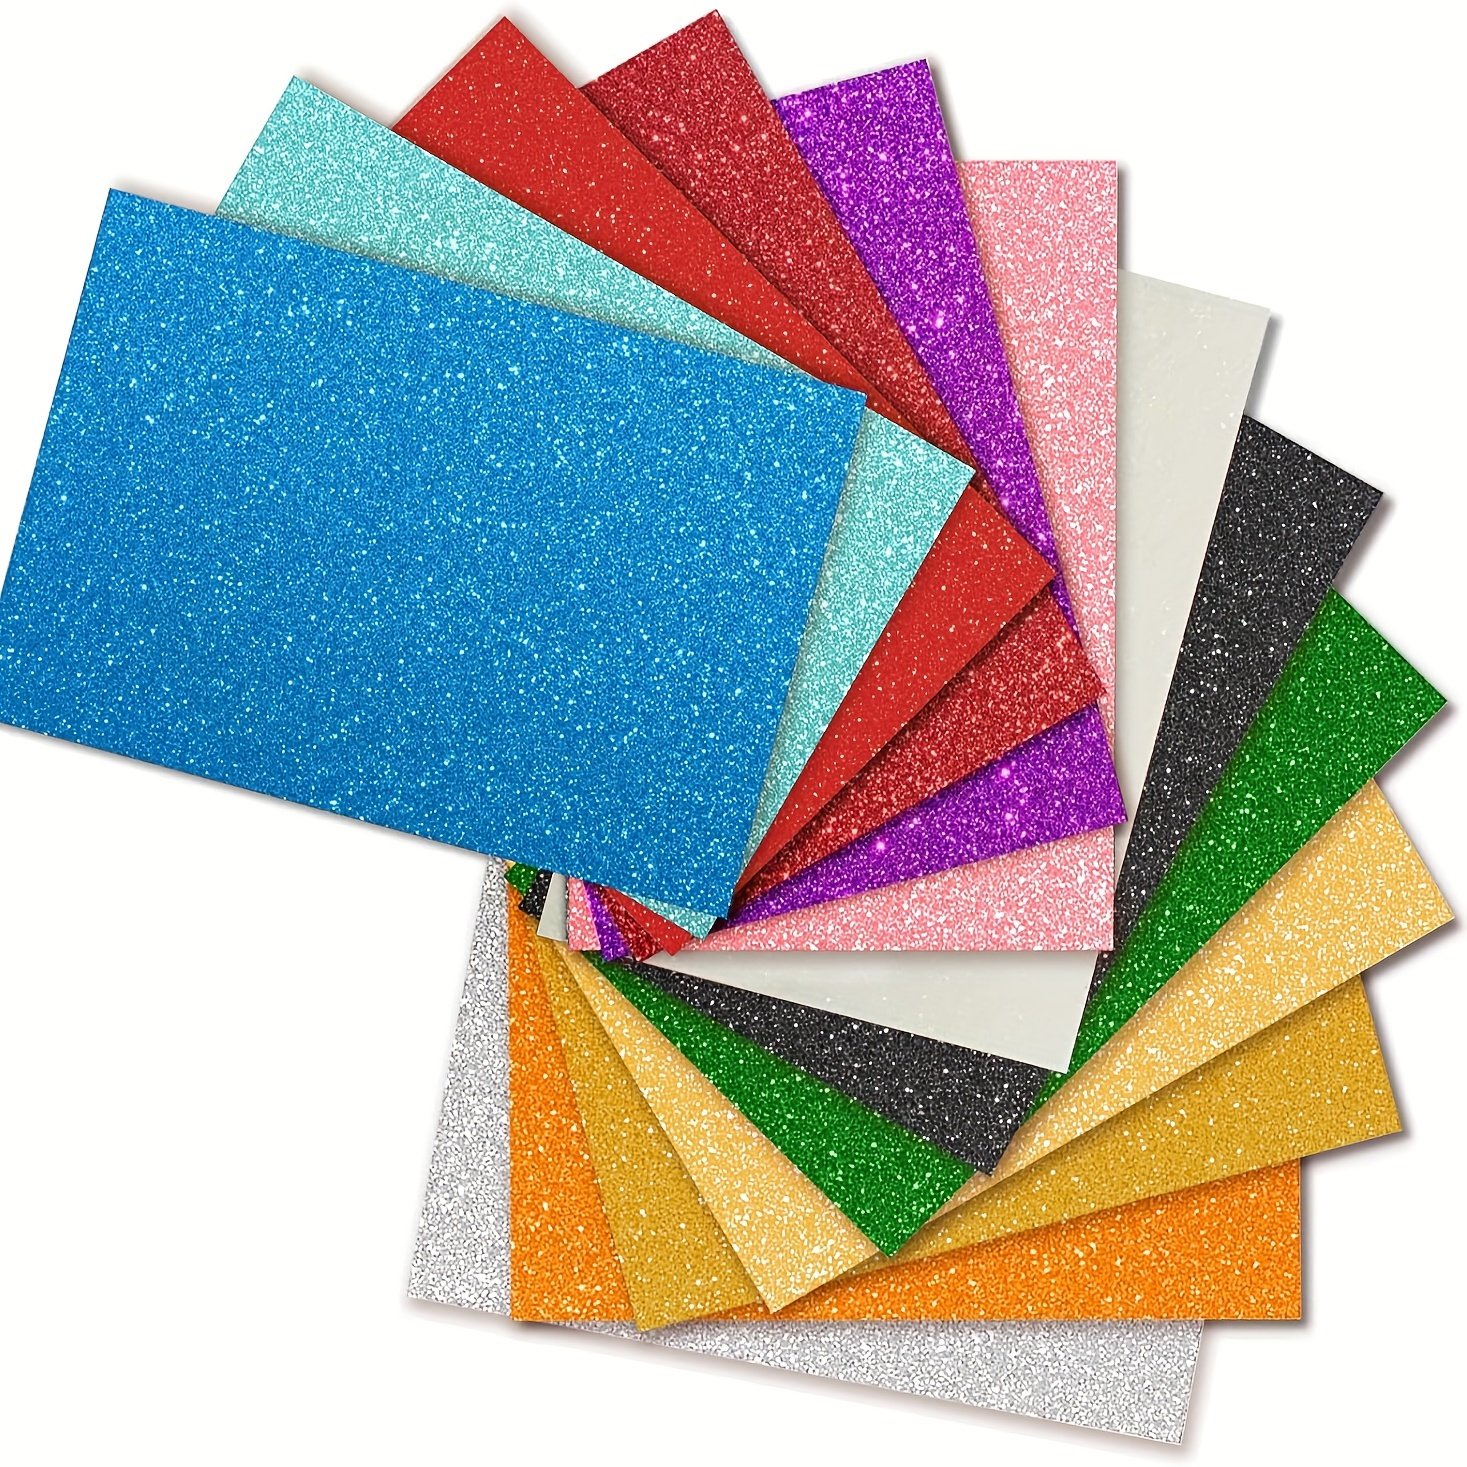 Heavyweight Glitter Cardstock Paper - 110lb. / 300gsm - 50 Sheets A4 Colored Craft Card Stock for Craft Project, DIY, Gift Wrapping, Birthday Party